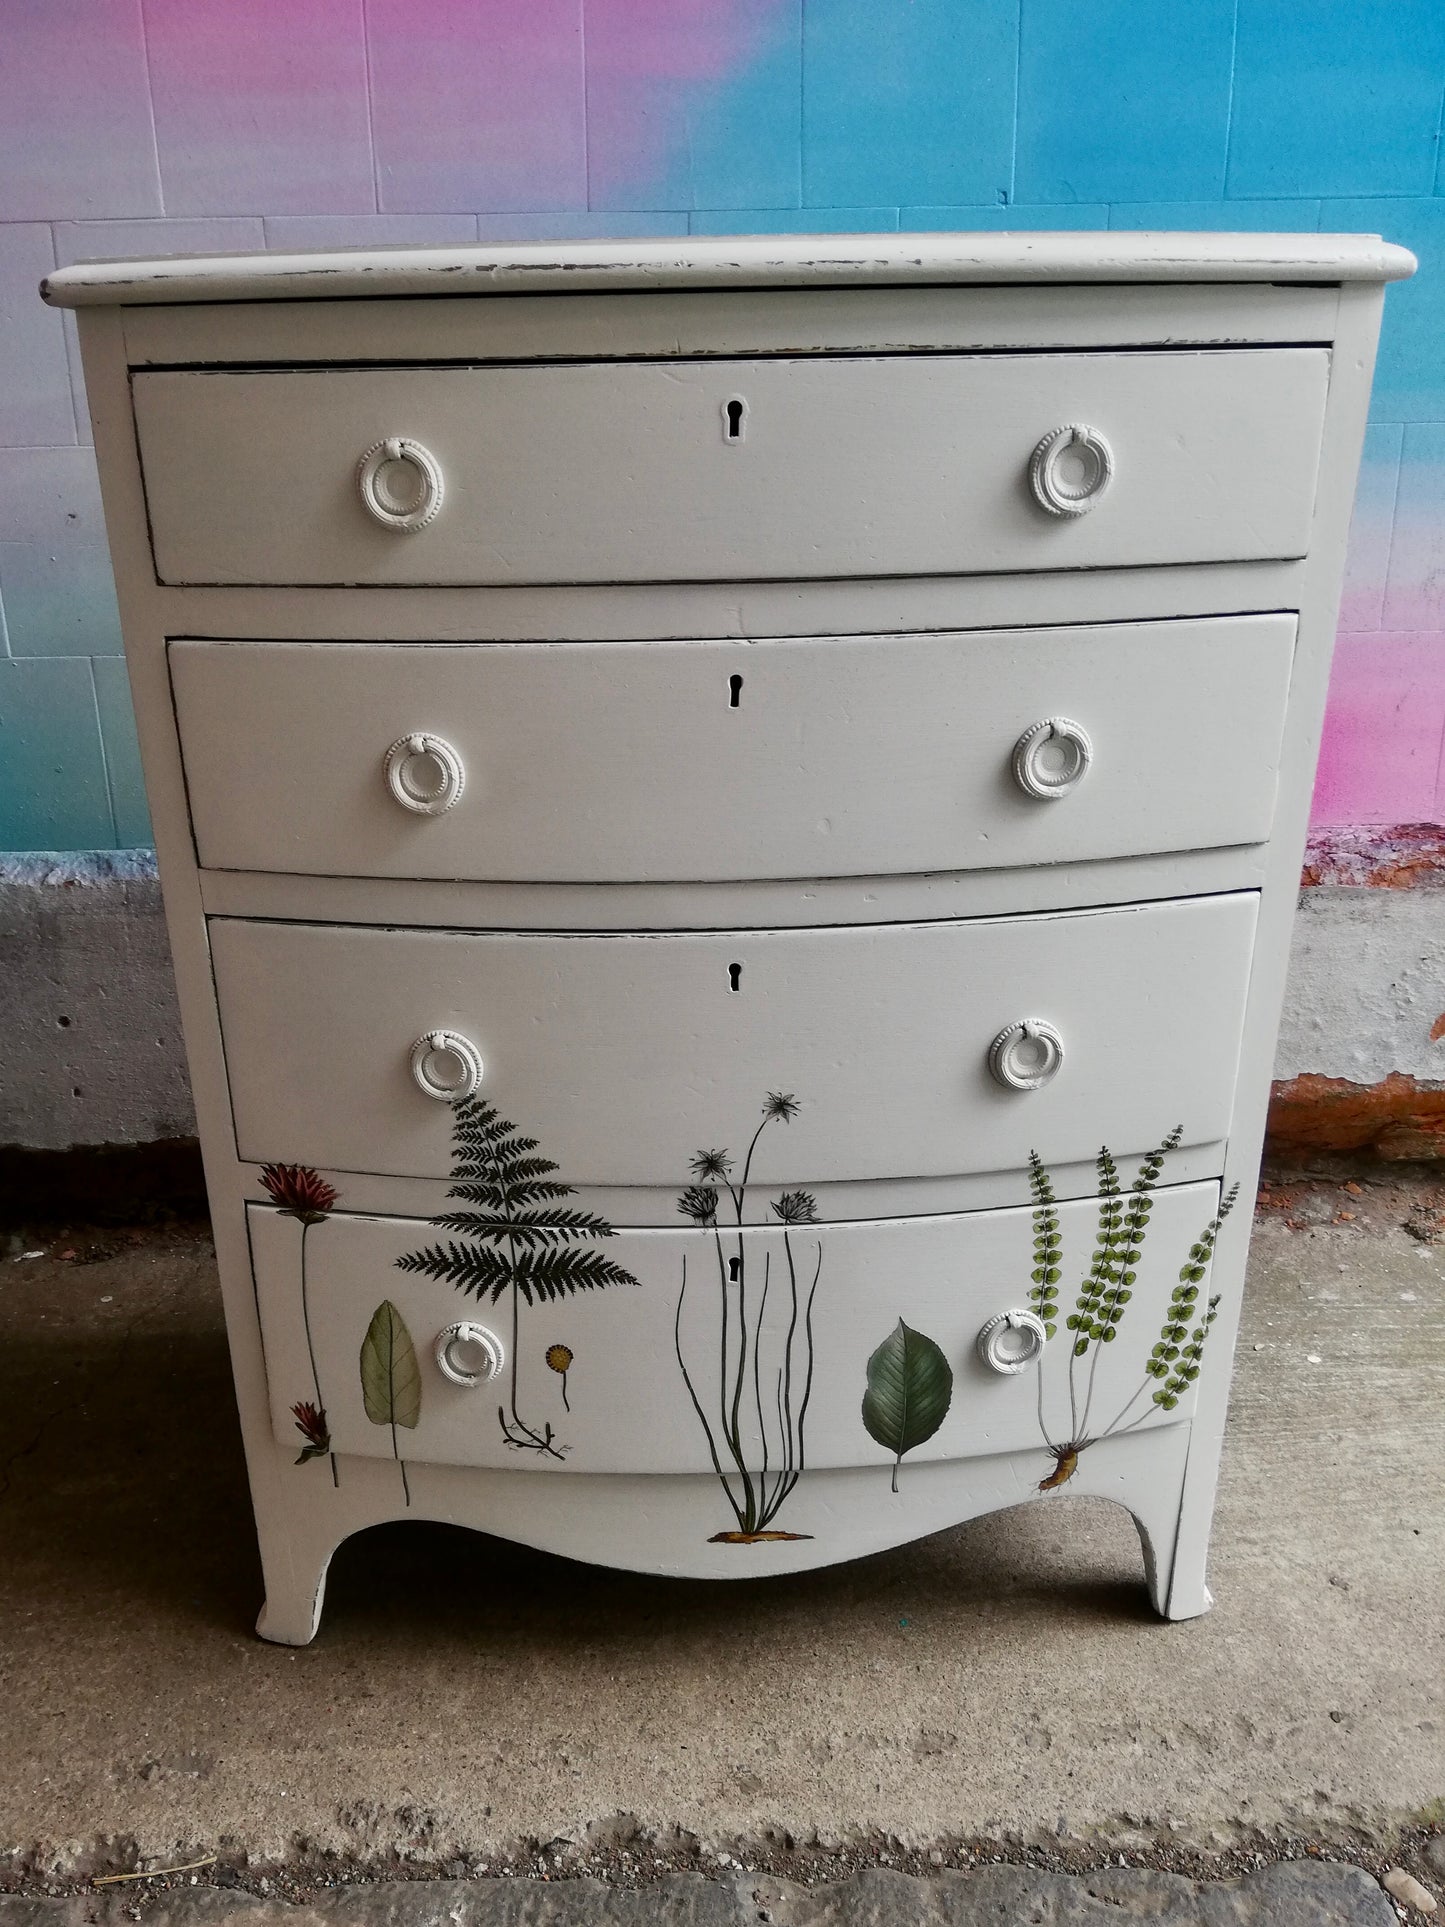 Painted to order - Iron Orchid designs decorated furniture